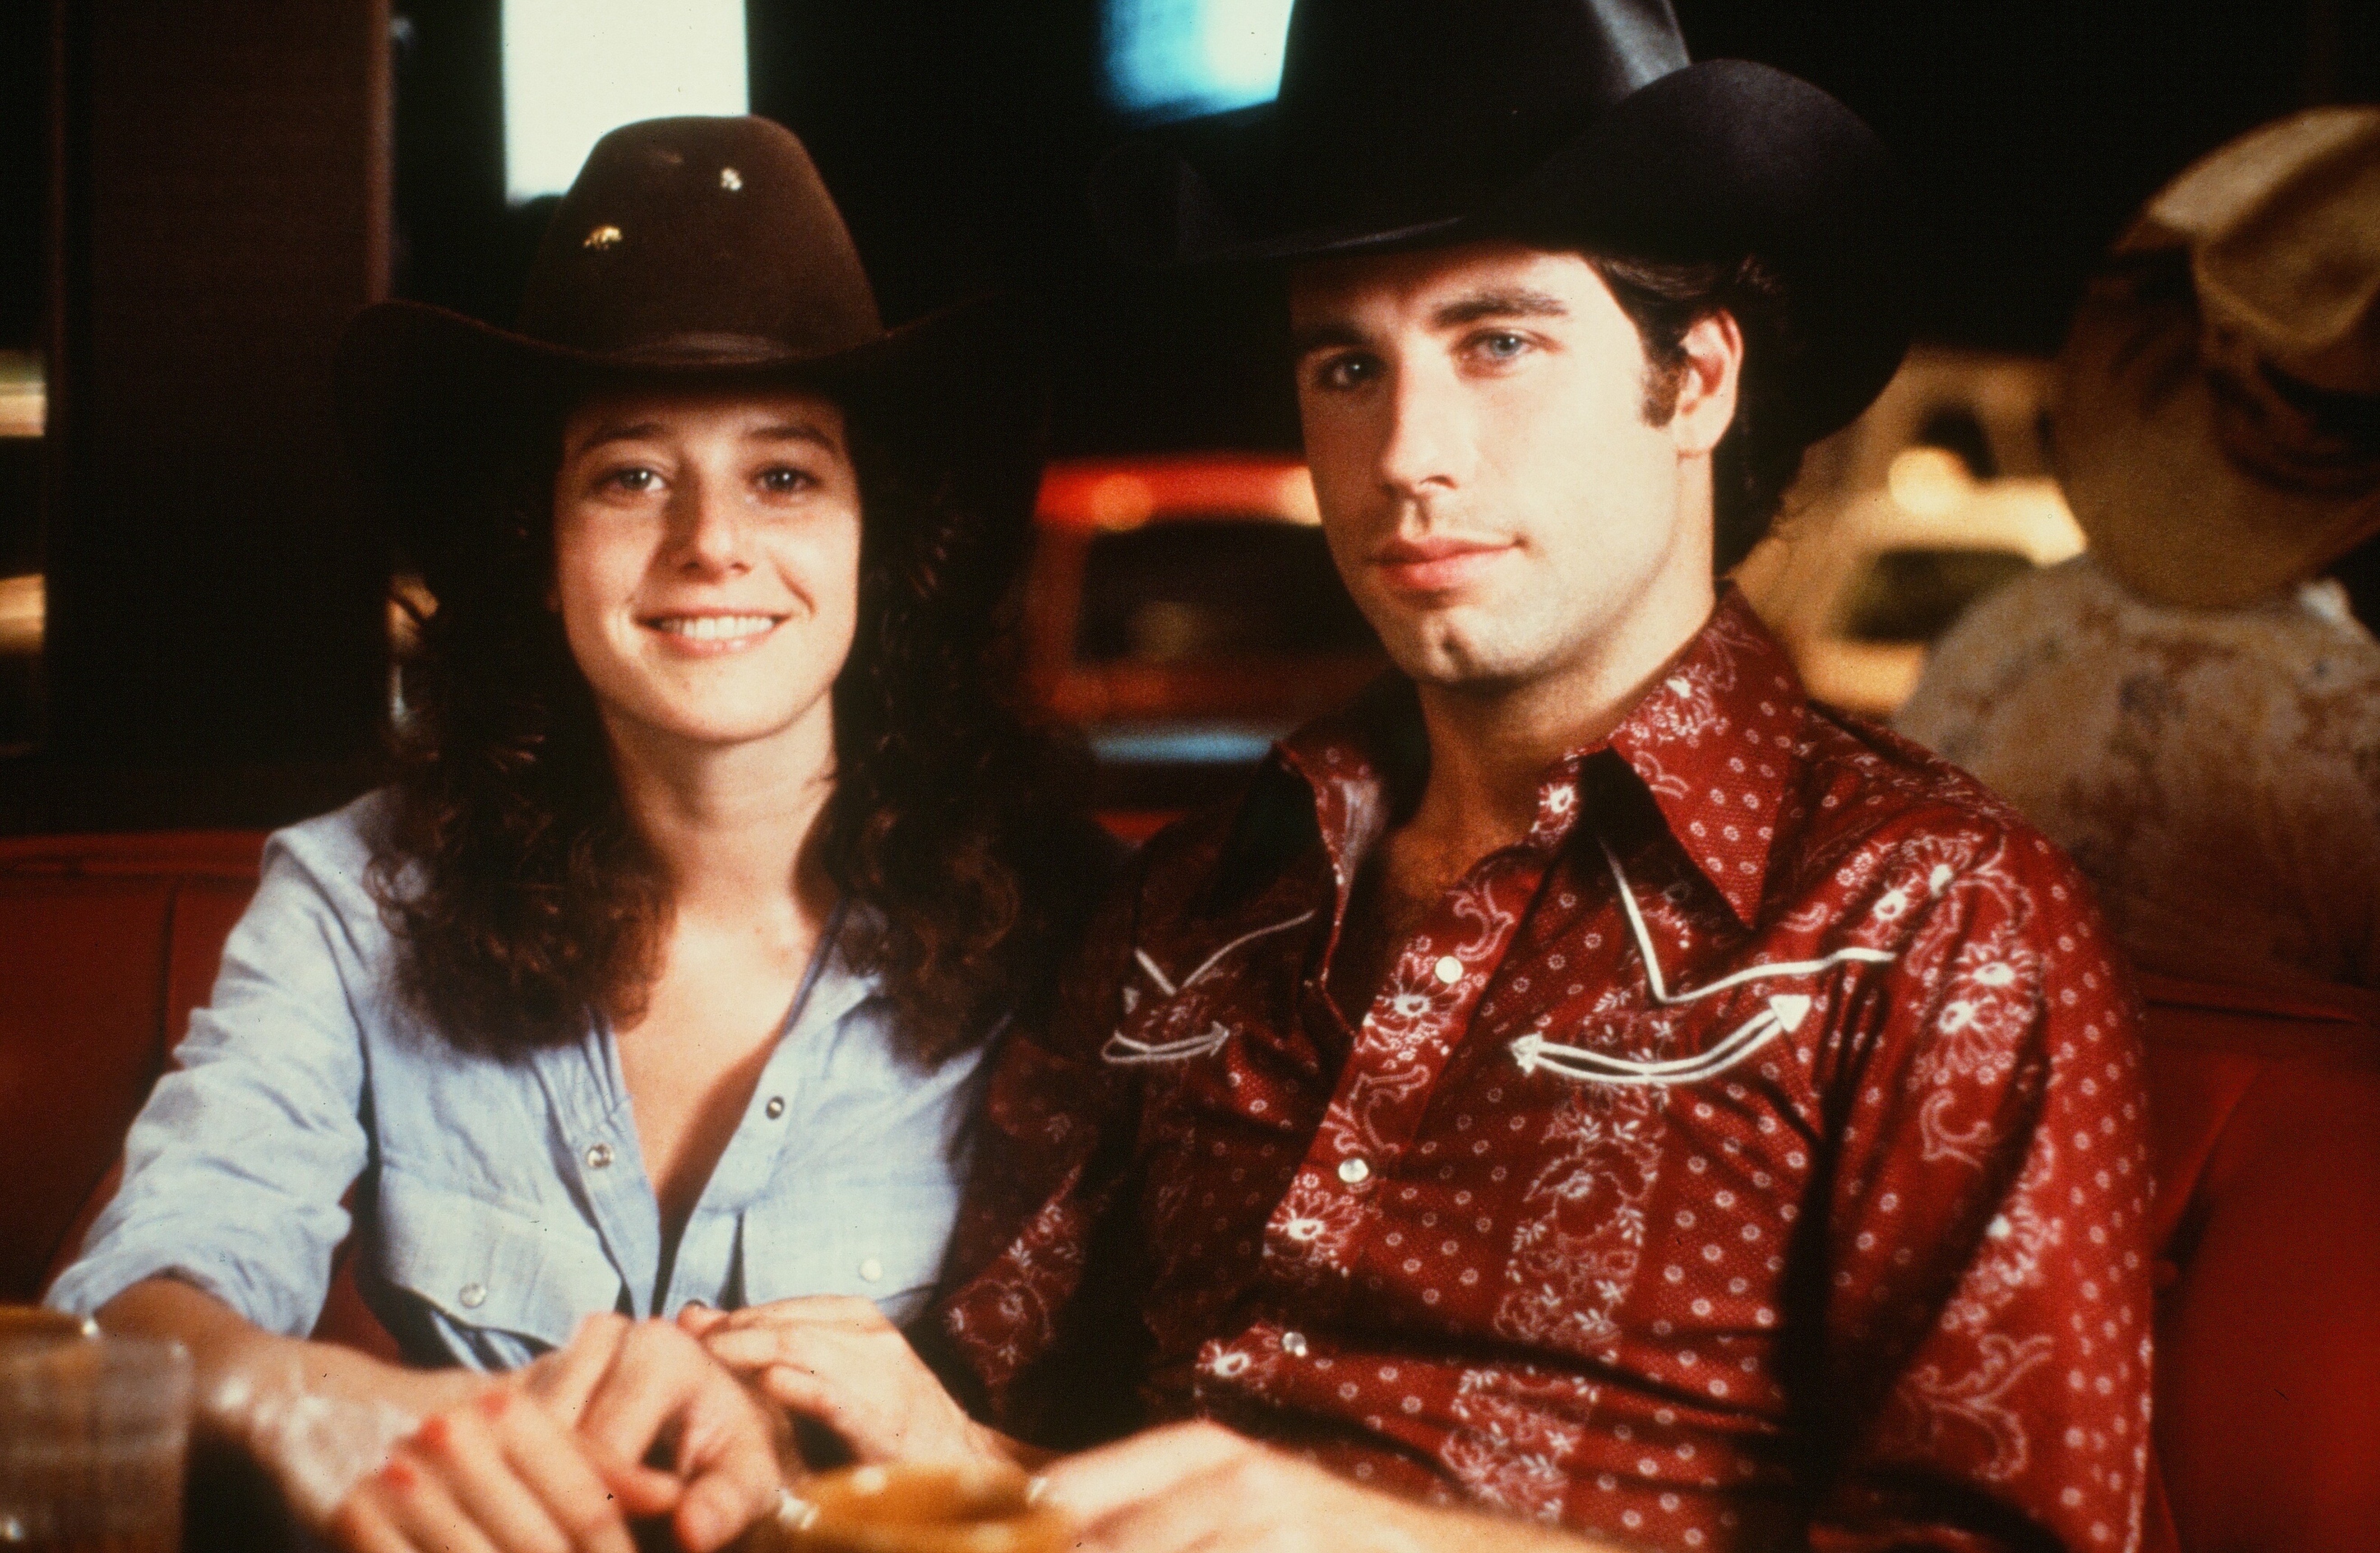 Debra Winger and John Travolta on the set of "Urban Cowboy," in 1980. | Source: Getty Images